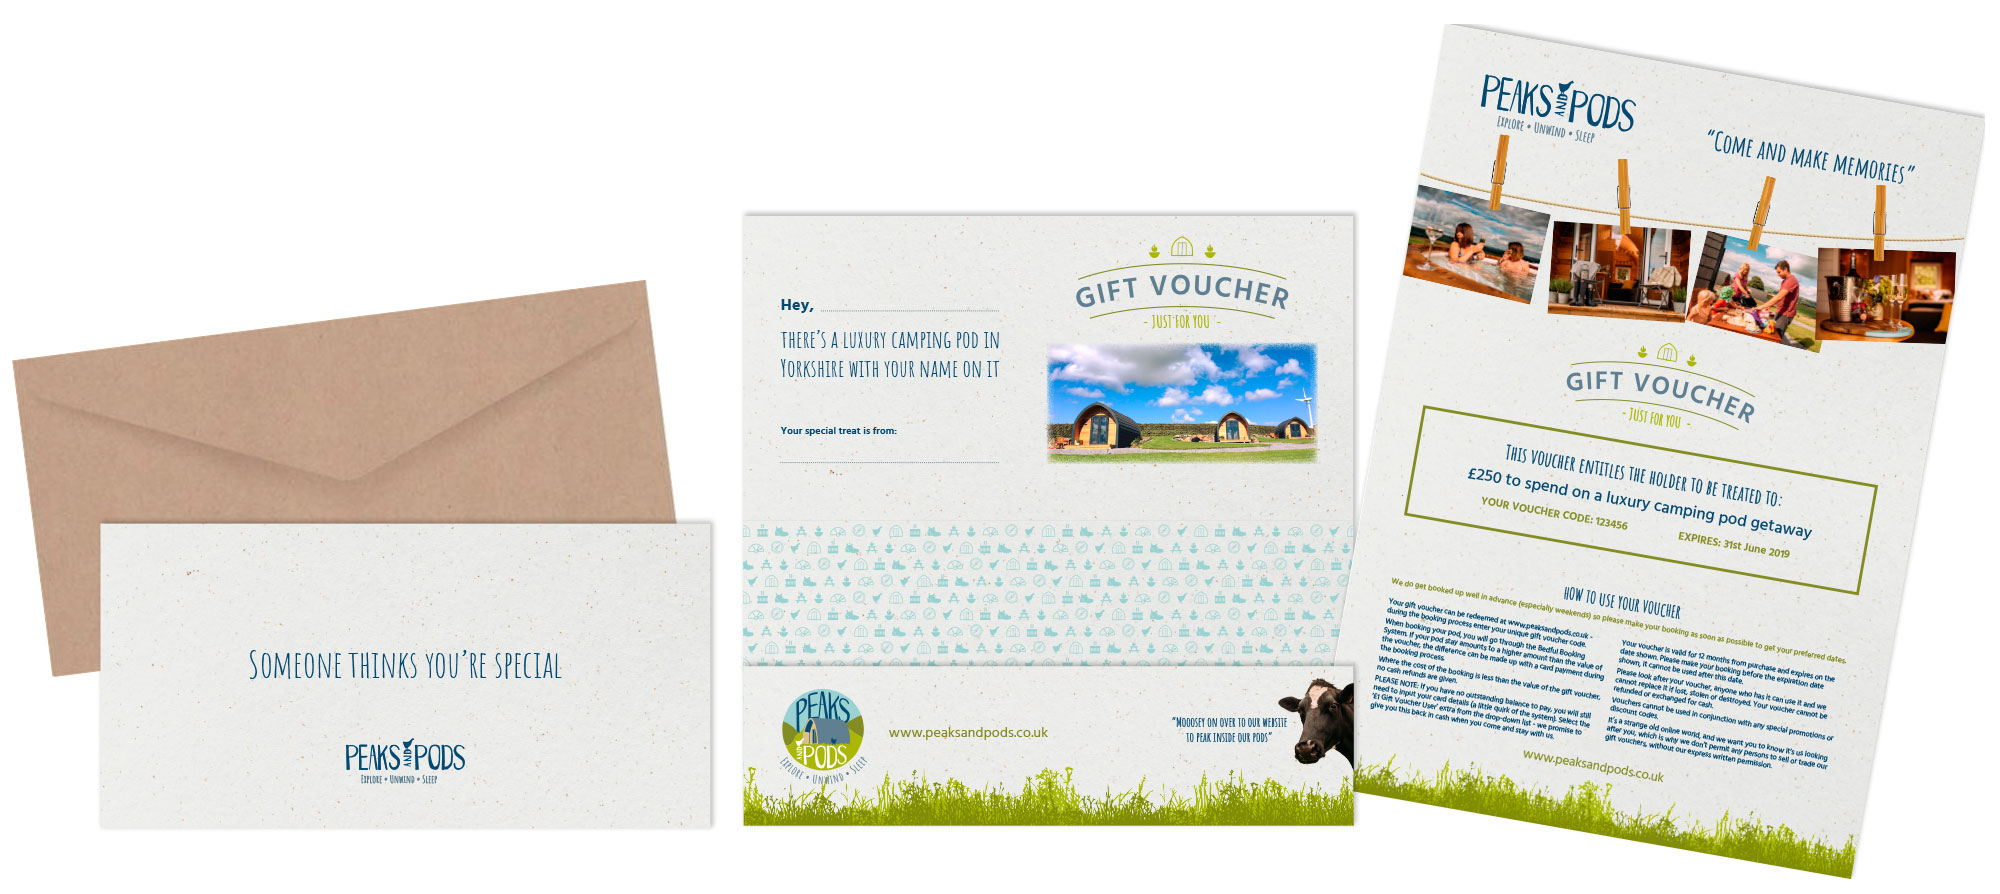 Peaks and Pods Gift Vouchers